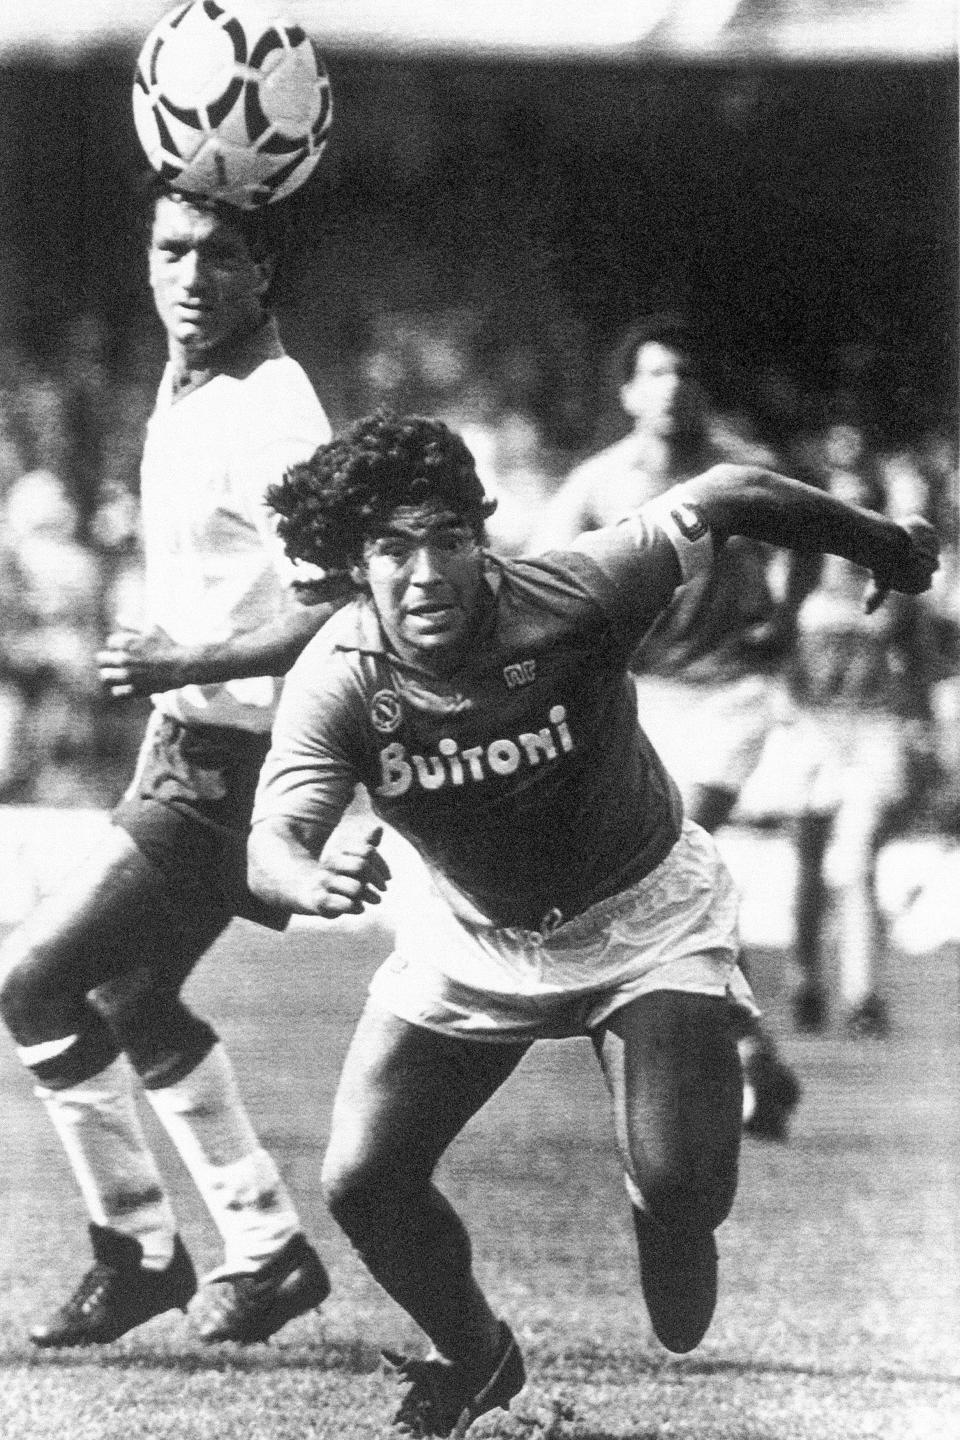 FILE - Argentine soccer superstar Diego Armando Maradona runs for the ball during a Serie A match between Napoli and Fiorentina in Naples, Italy, May 10, 1987. The legend of Diego Maradona at Napoli hovers over the current team’s Italian league title, which was sealed Thursday, May 4, 2023. The Argentina standout holds saint-like status in Naples 2 ½ years after his death and more than three decades after he led Napoli to its first two Serie A titles. (AP Photo/Massimo Sambucetti, File)